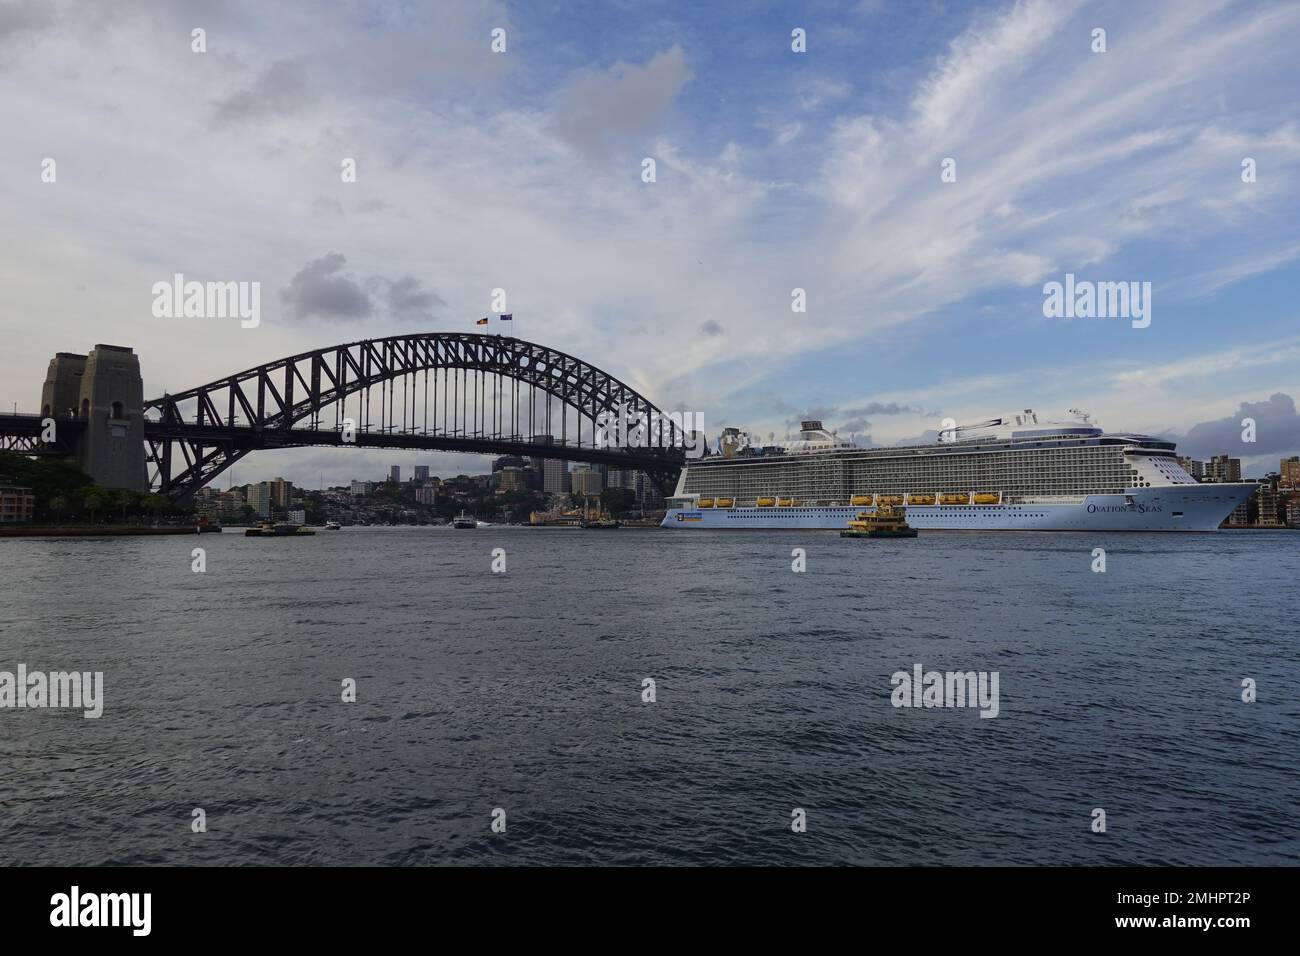 Ovation of the Seas cruise ship owned by Royal Caribbean International departing Sydney, Australia Stock Photo